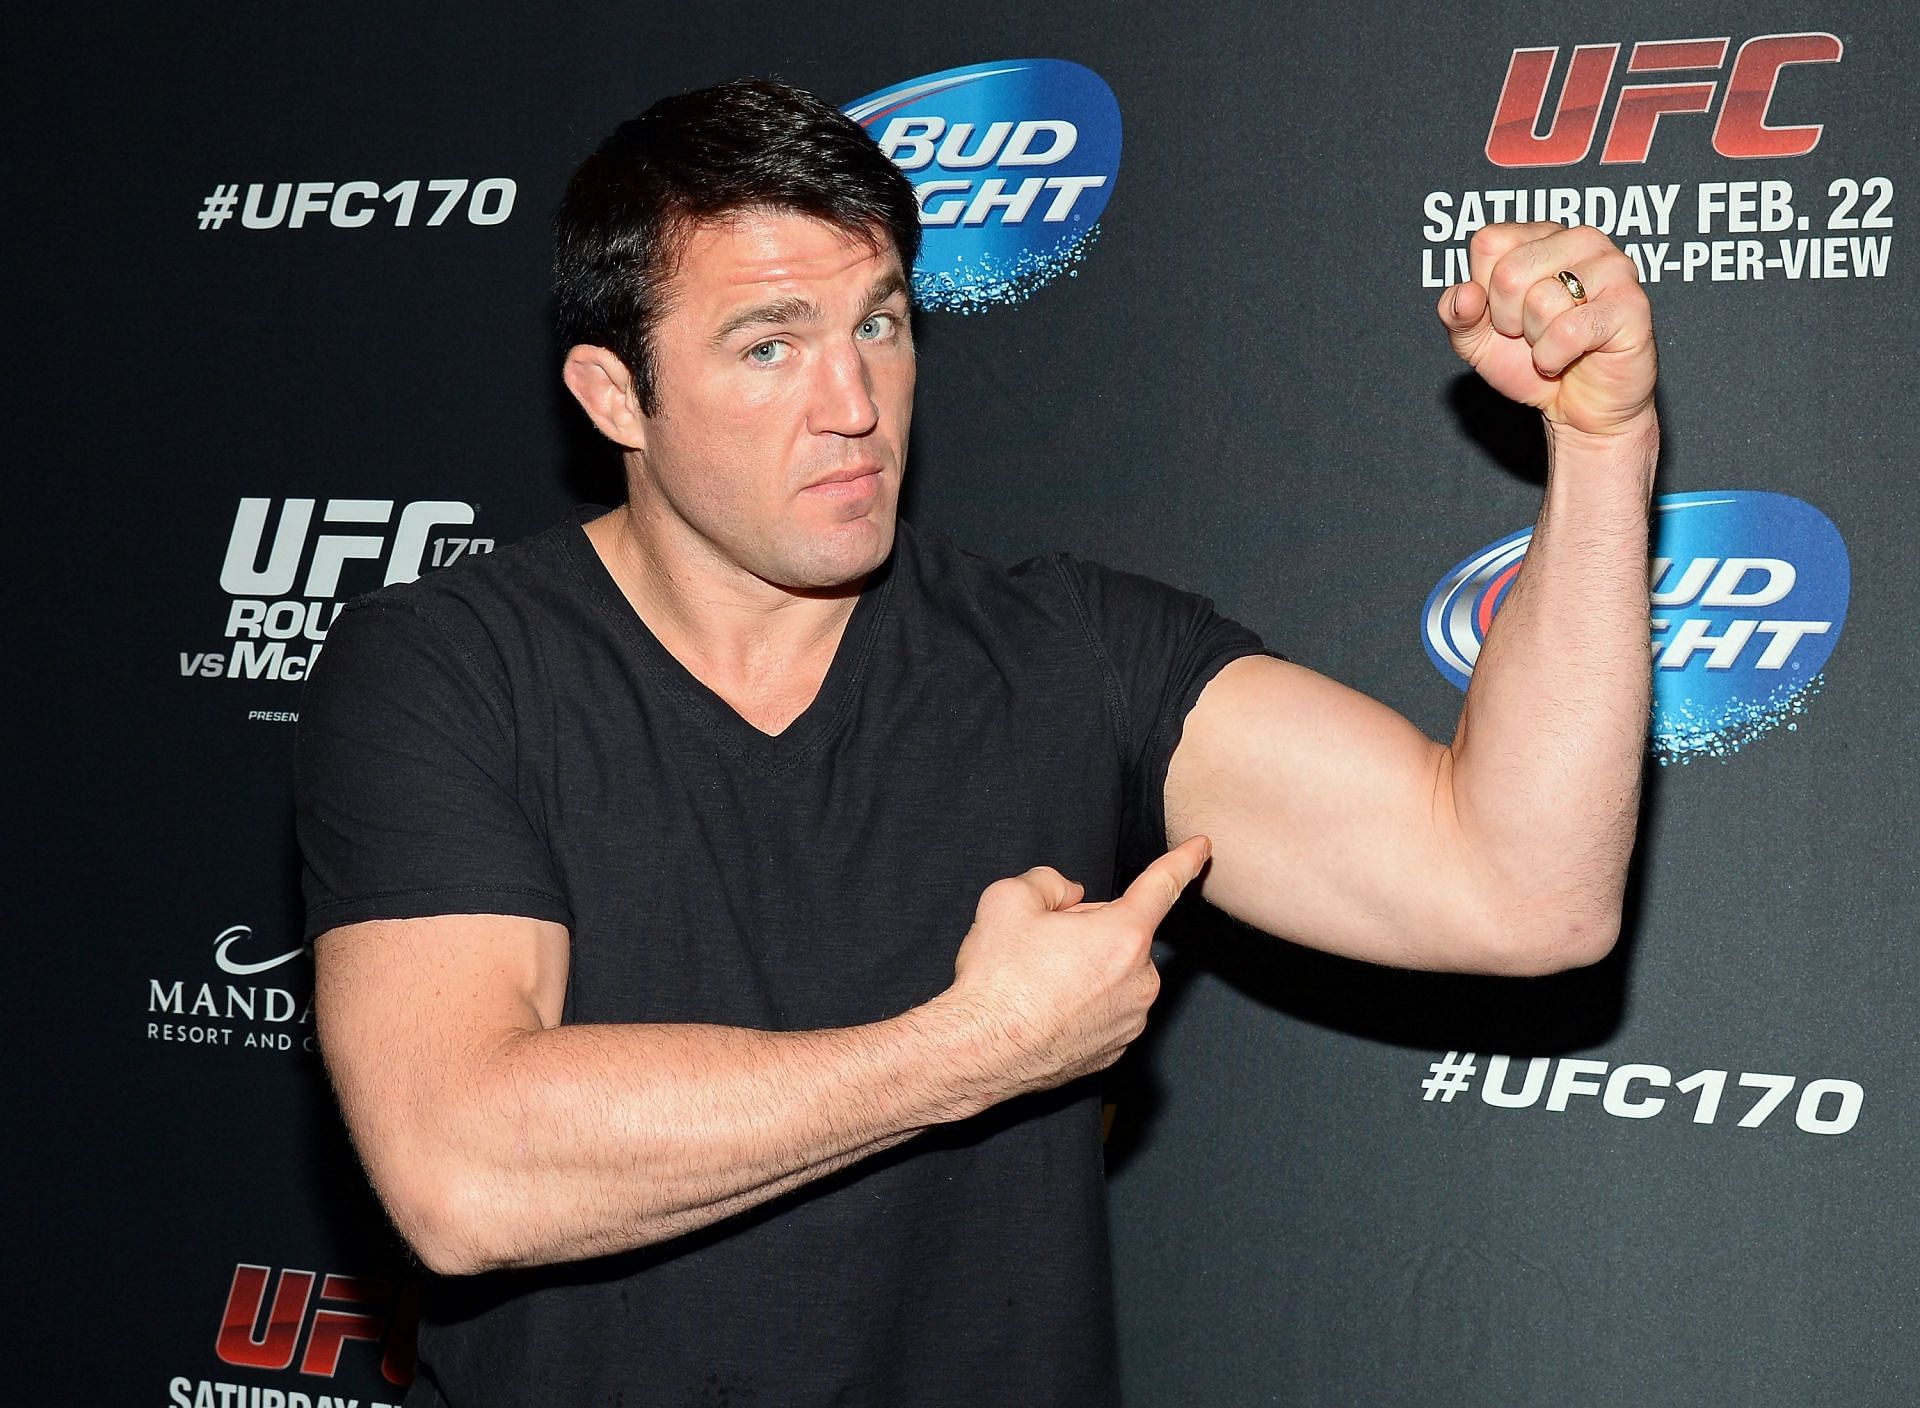 Celebrities Attend UFC 170 - Rousey v McMann: Retired UFC fighter Chael Sonnen (Image courtesy of Getty)